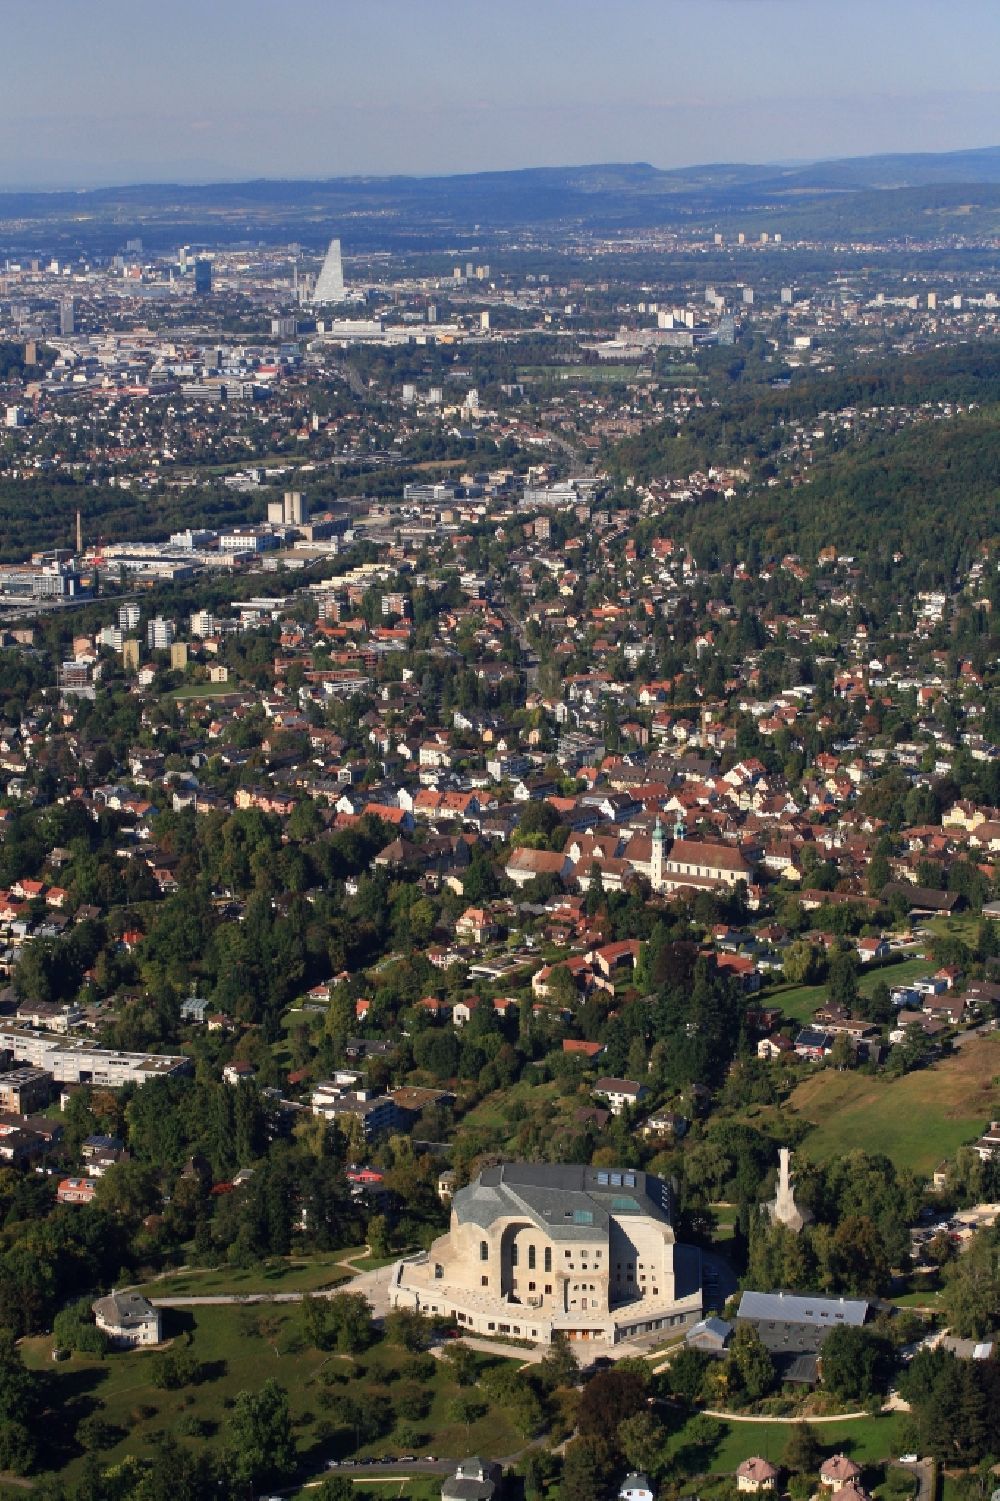 Aerial image Dornach - The Goetheanum in Dornach, Switzerland in the canton of Solothurn is the headquarters of the Anthroposophical Society and the School of Spiritual Science. Looking northbound towards Basle